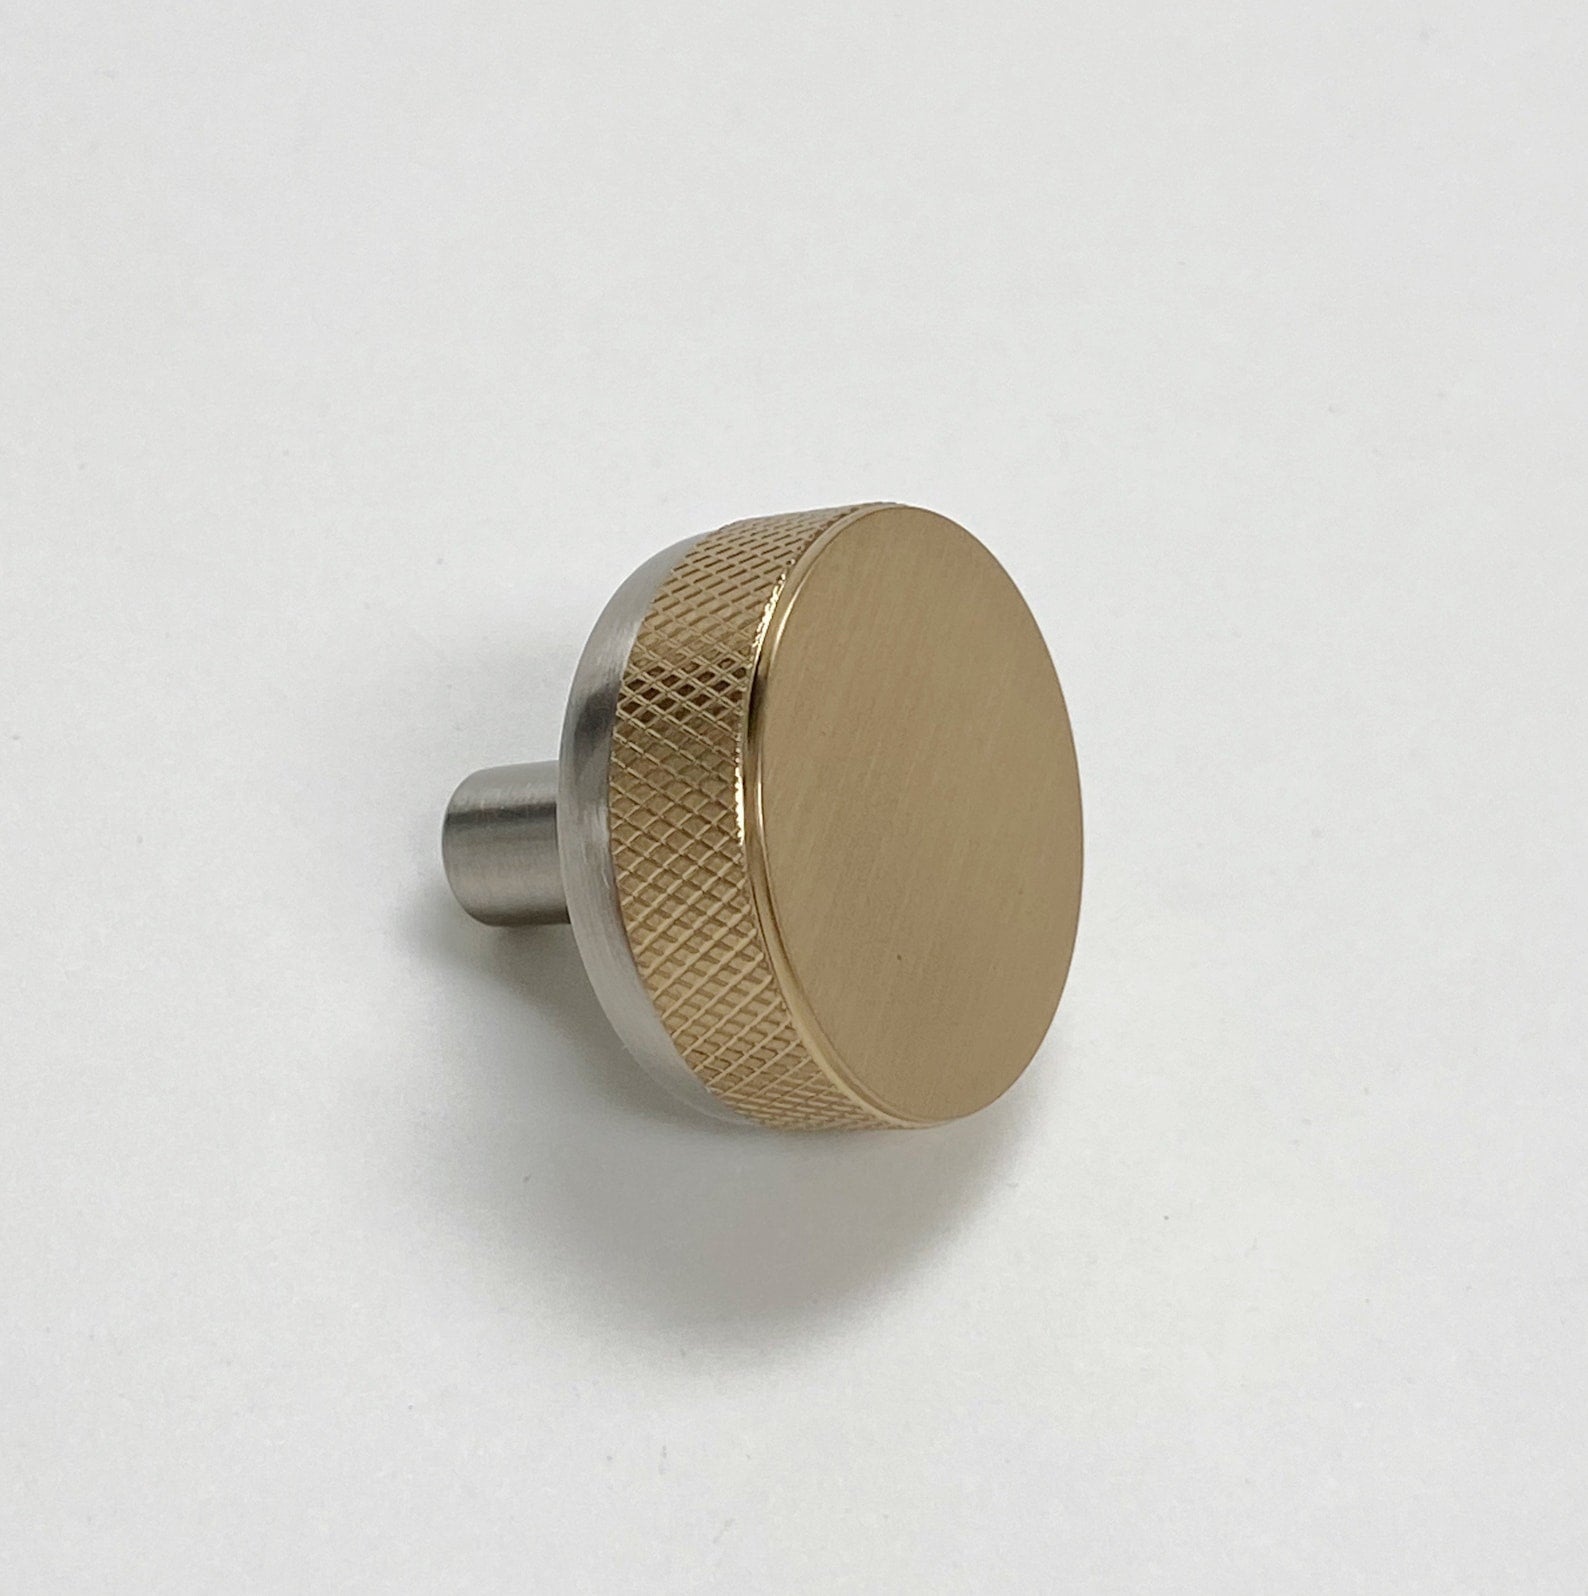 Knurled "Converse" Brushed Nickel and Champagne Bronze Dual-Finish Knobs and Pulls